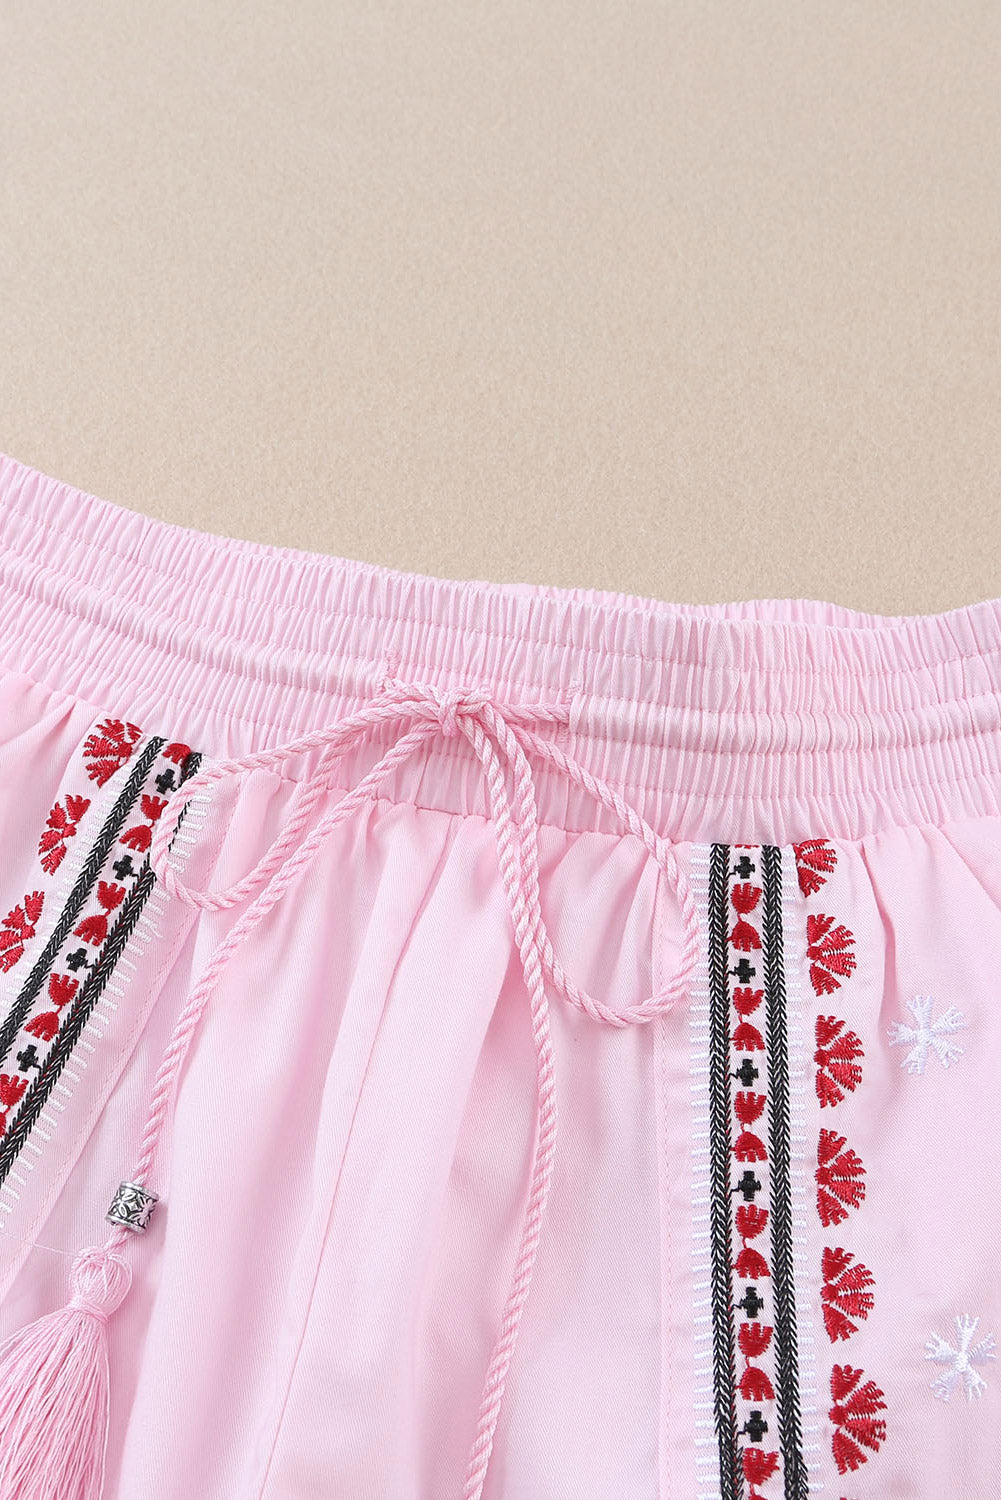 LC731219-10-S, LC731219-10-M, LC731219-10-L, LC731219-10-XL, Pink Boho Embroidered Floral Tasseled Drawstring Waist Casual Shorts